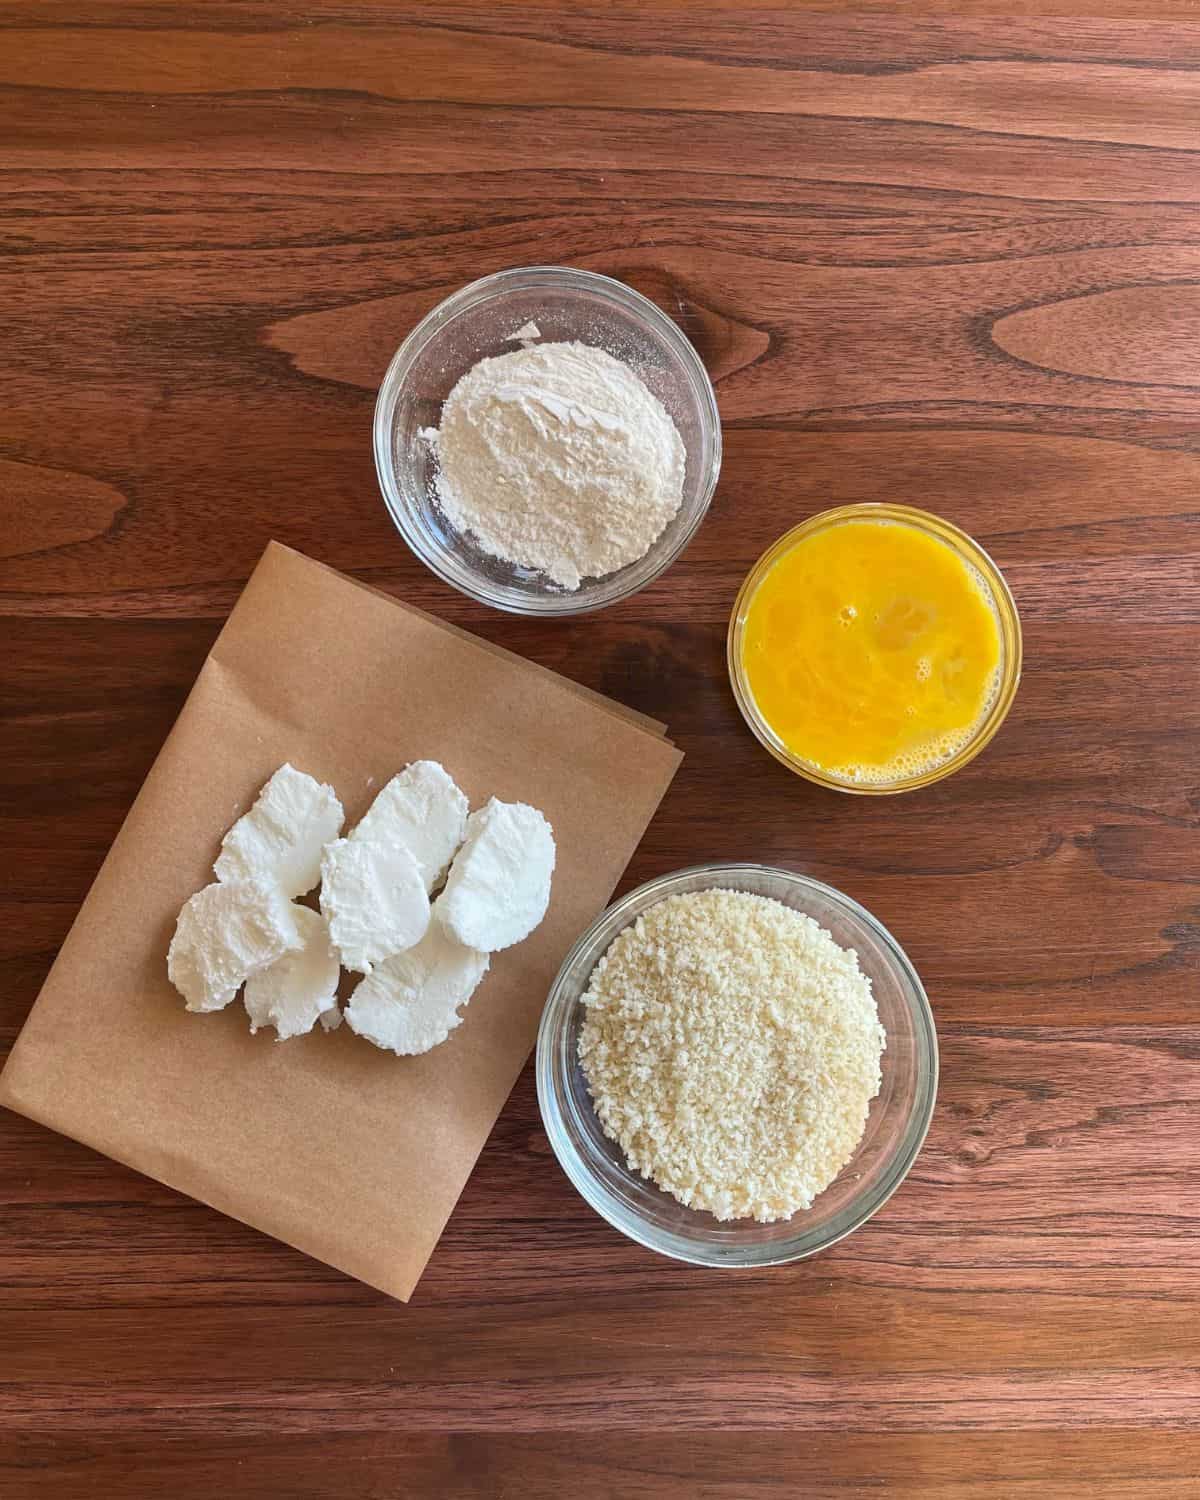 Sliced goat cheese rounds, a bowl of flour, a bowl of panko bread crumbs, and a bowl of whisked eggs.